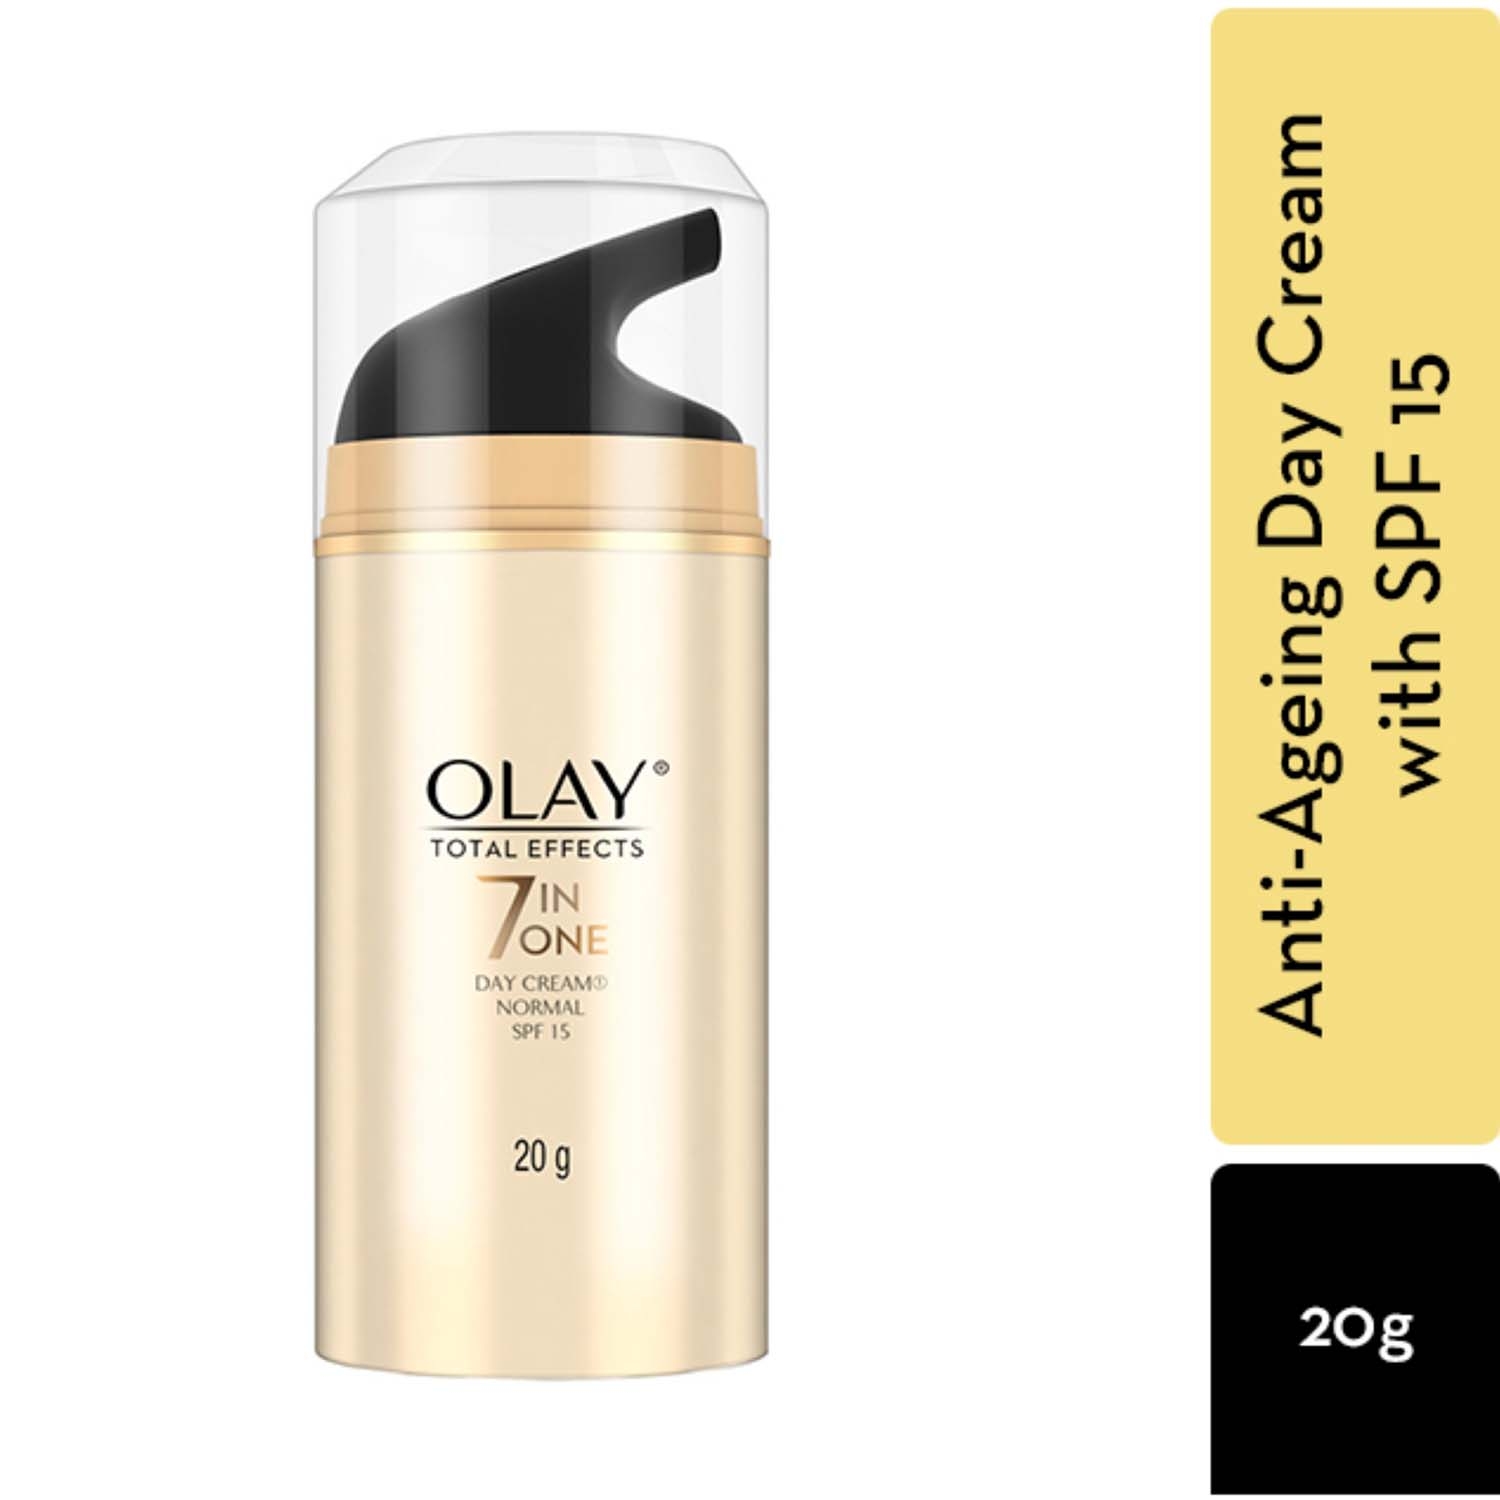 Olay | Olay 7-In-1 Total Effects Anti Ageing Day Cream SPF 15 (20g)